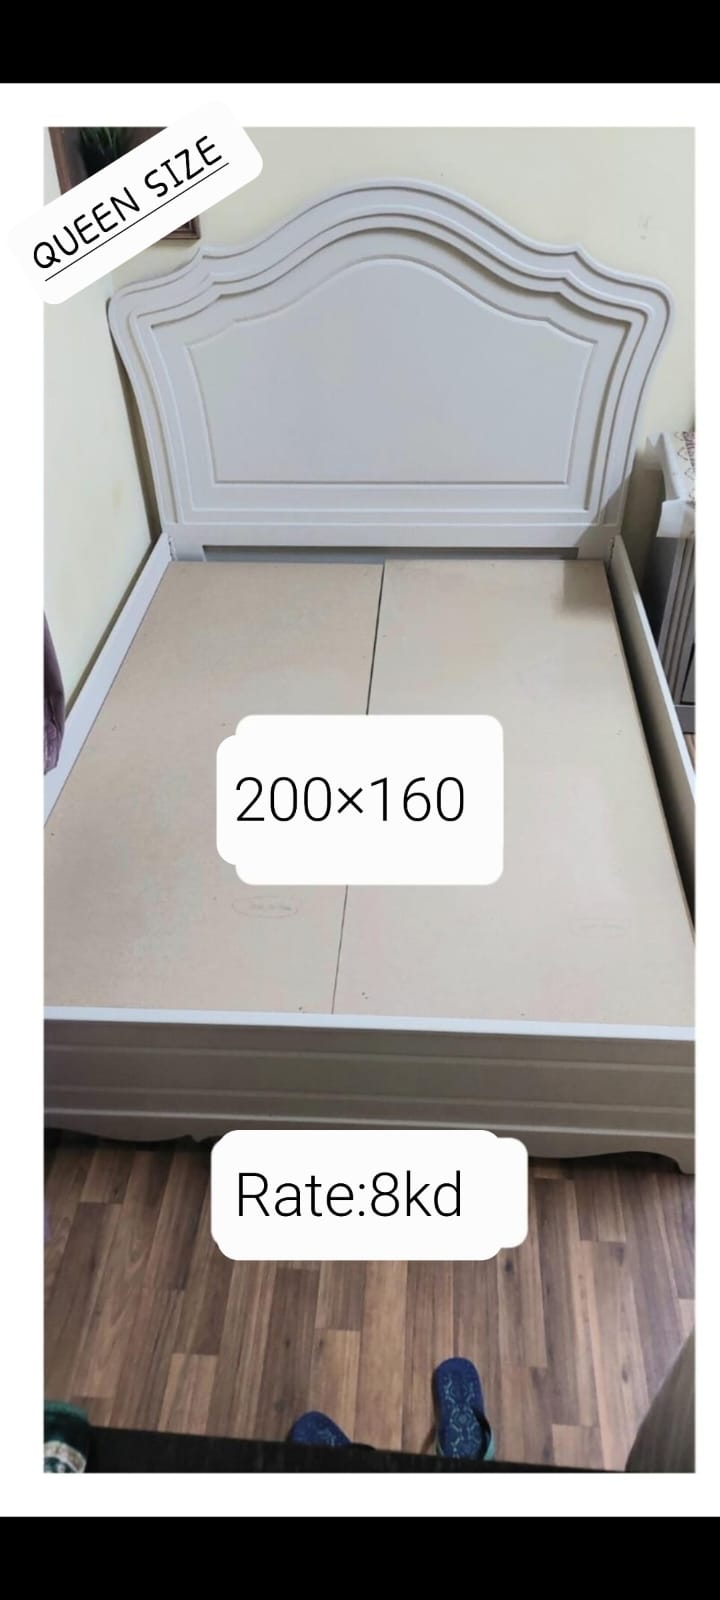 Queen size cot for sale 